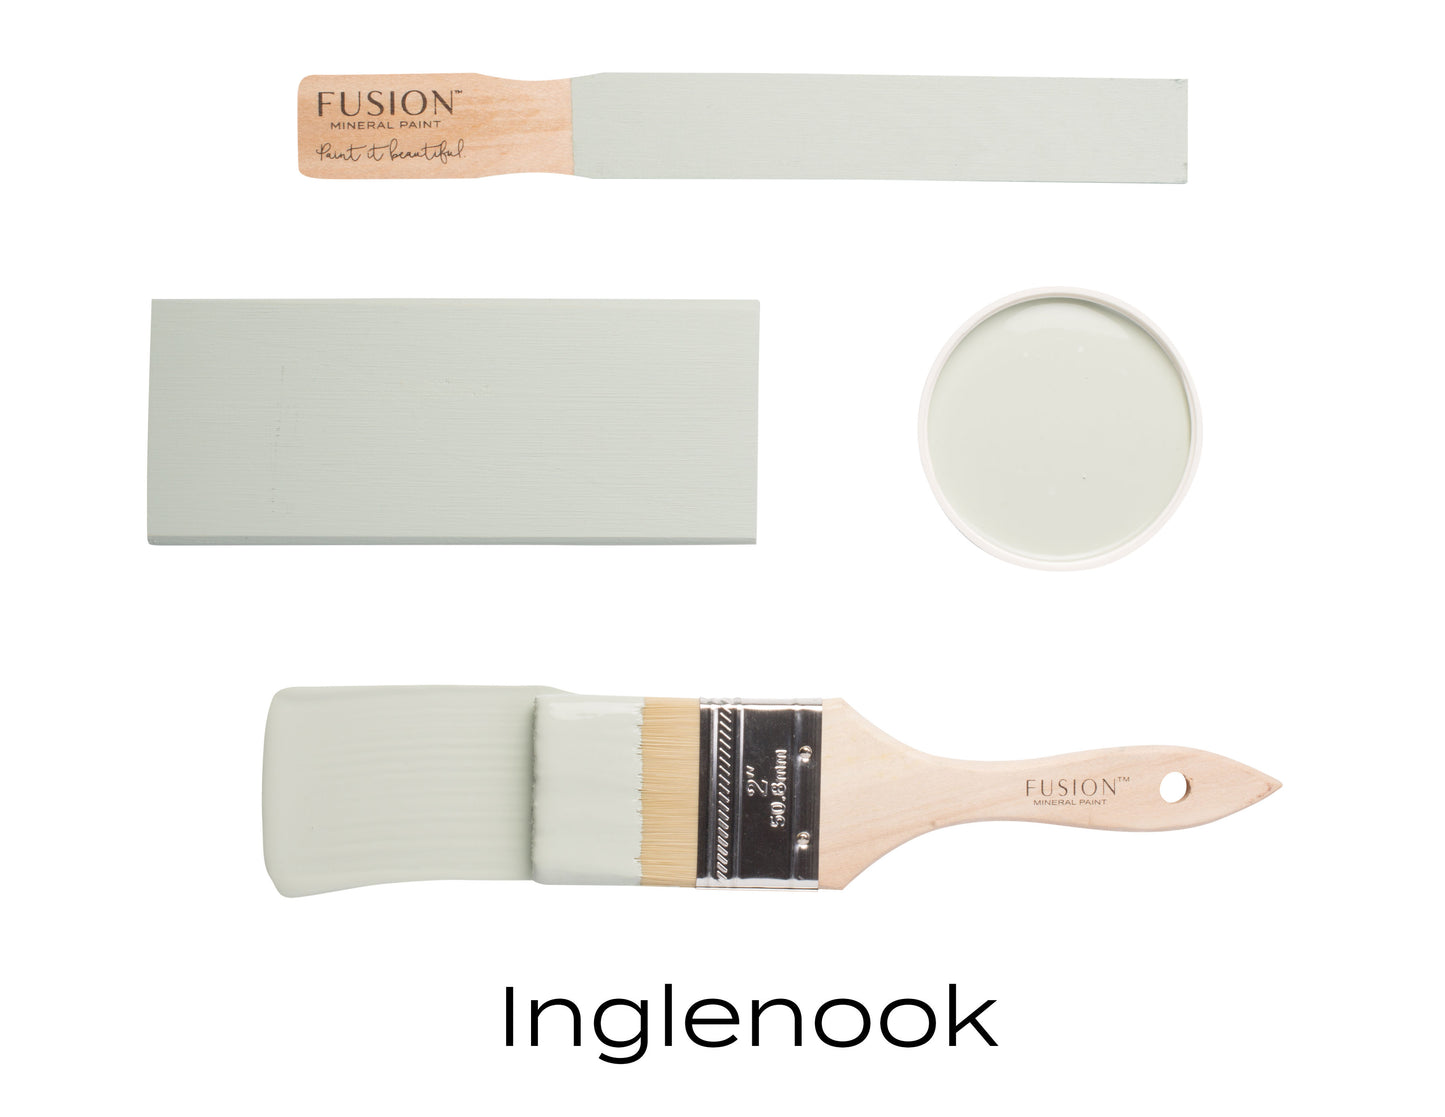 Inglenook by Fusion